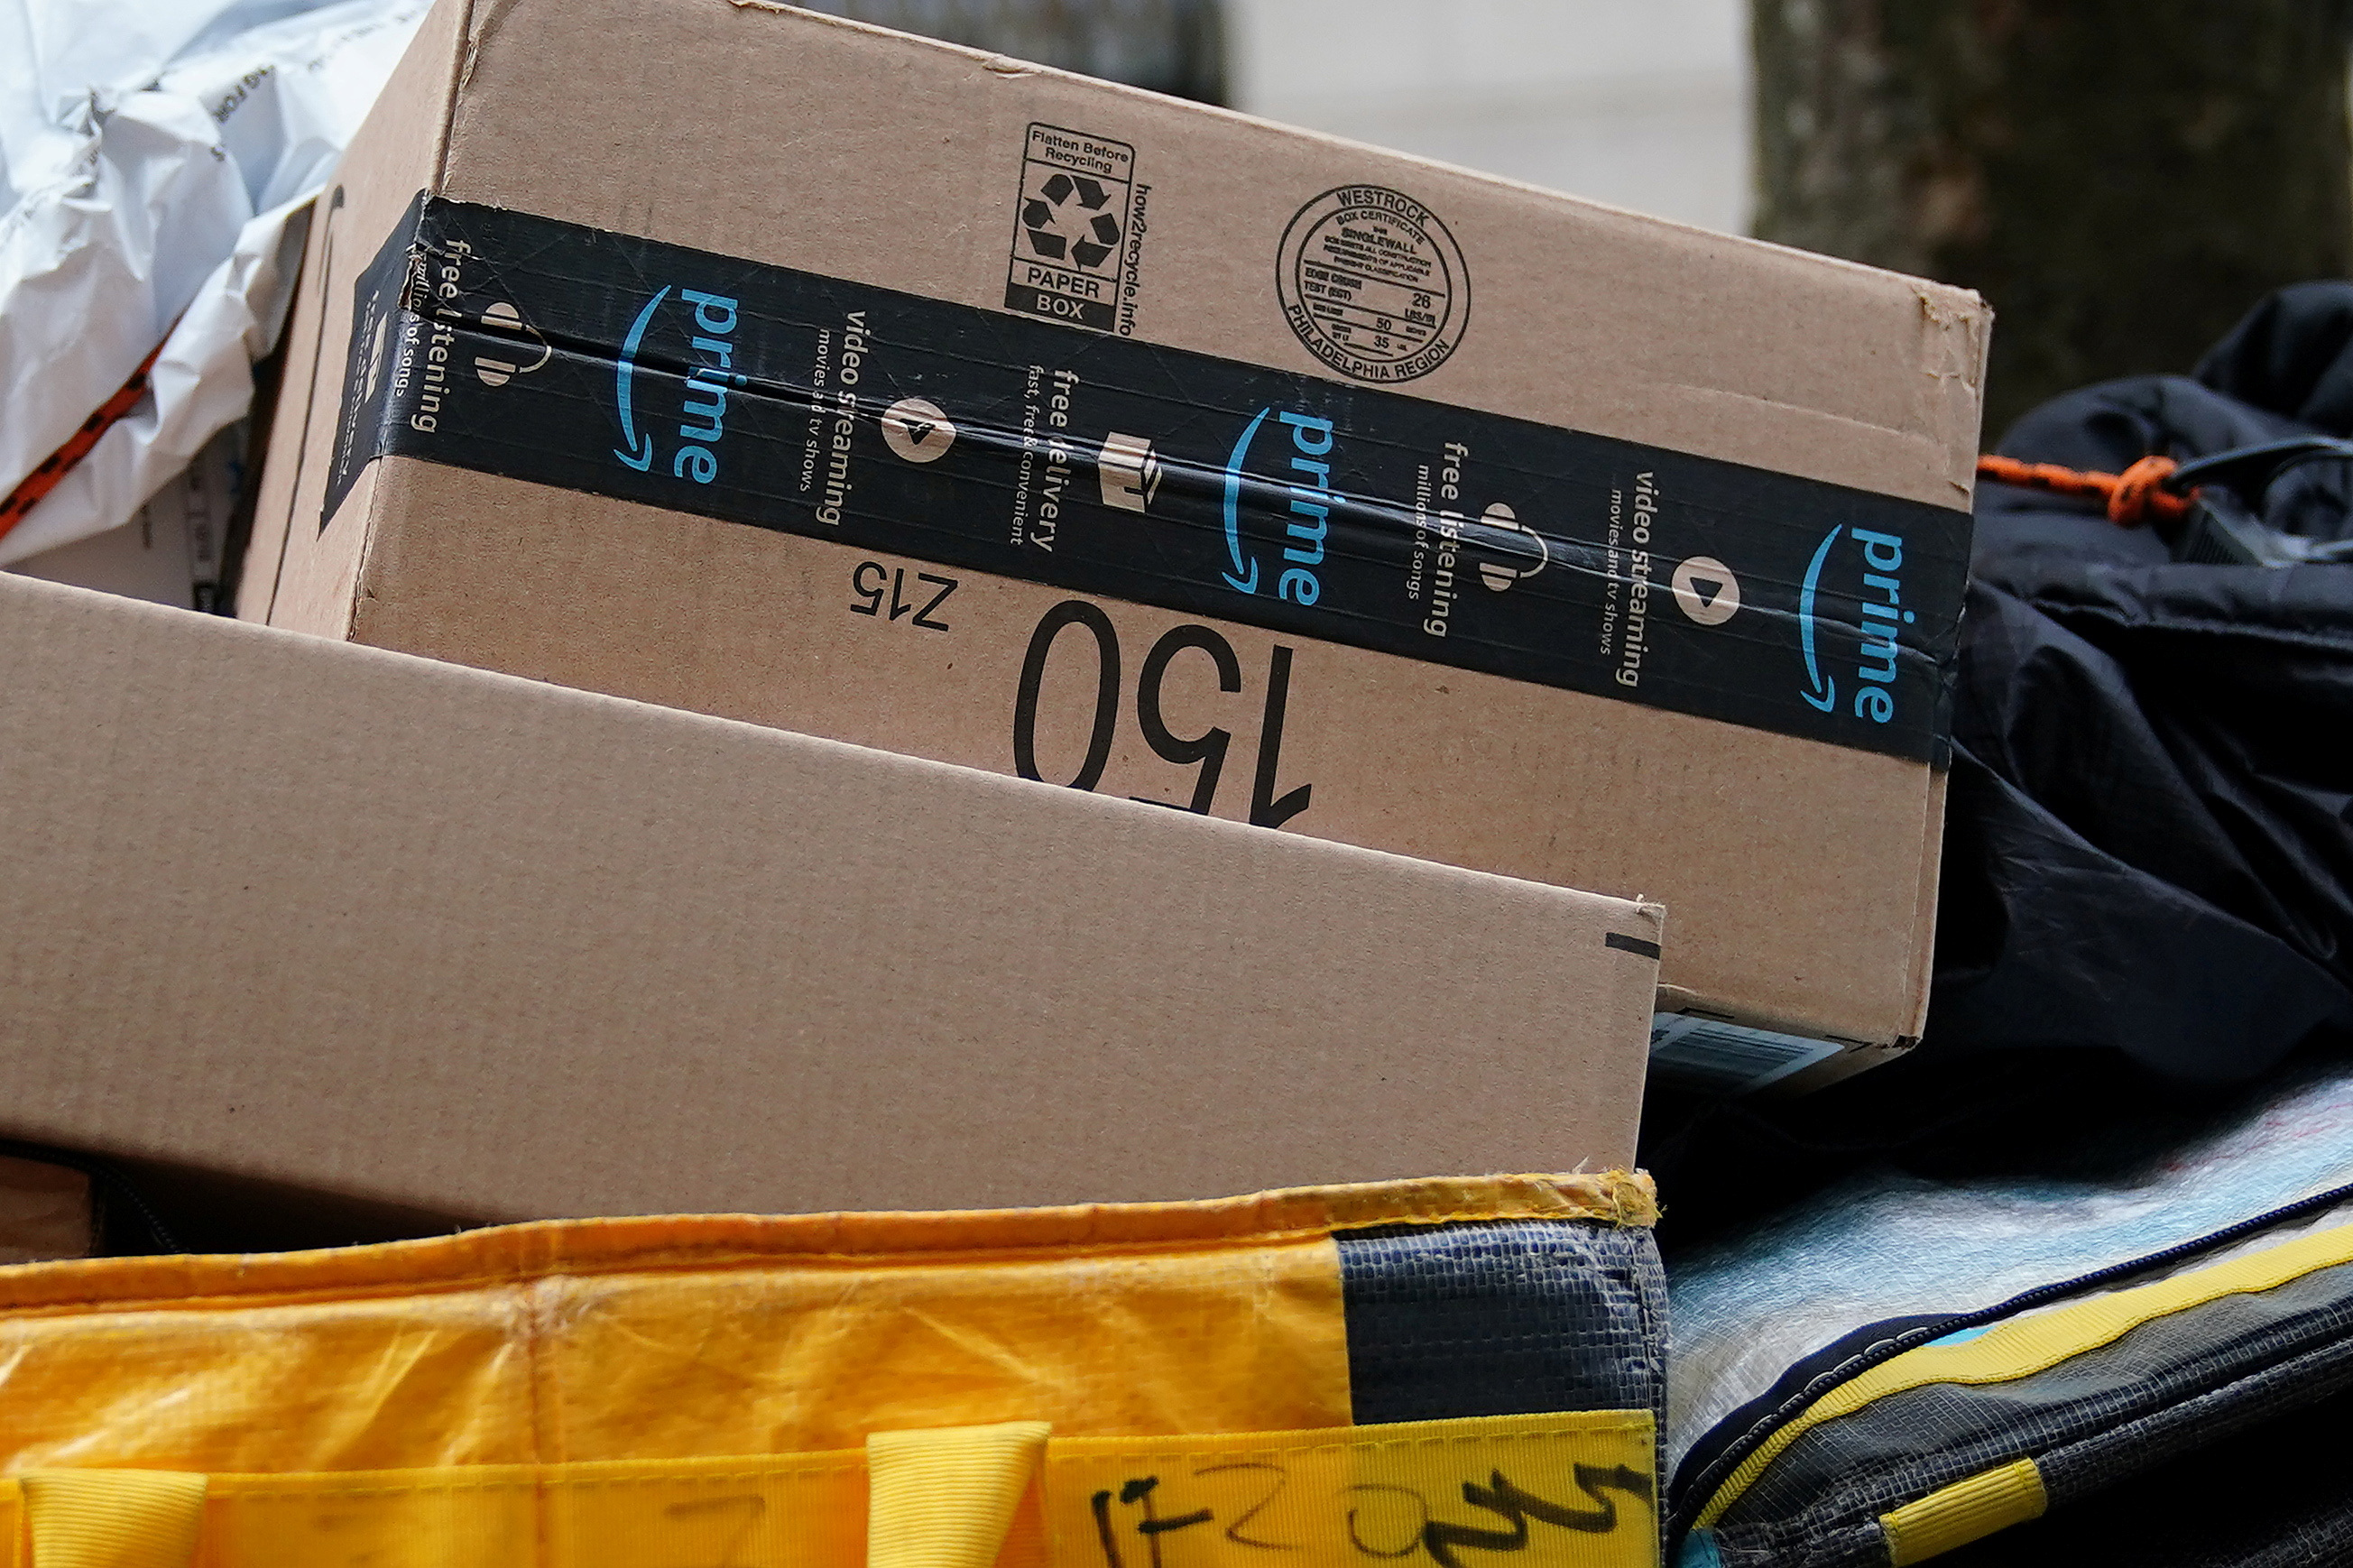 Amazon packages are pictured on a delivery cart in New York